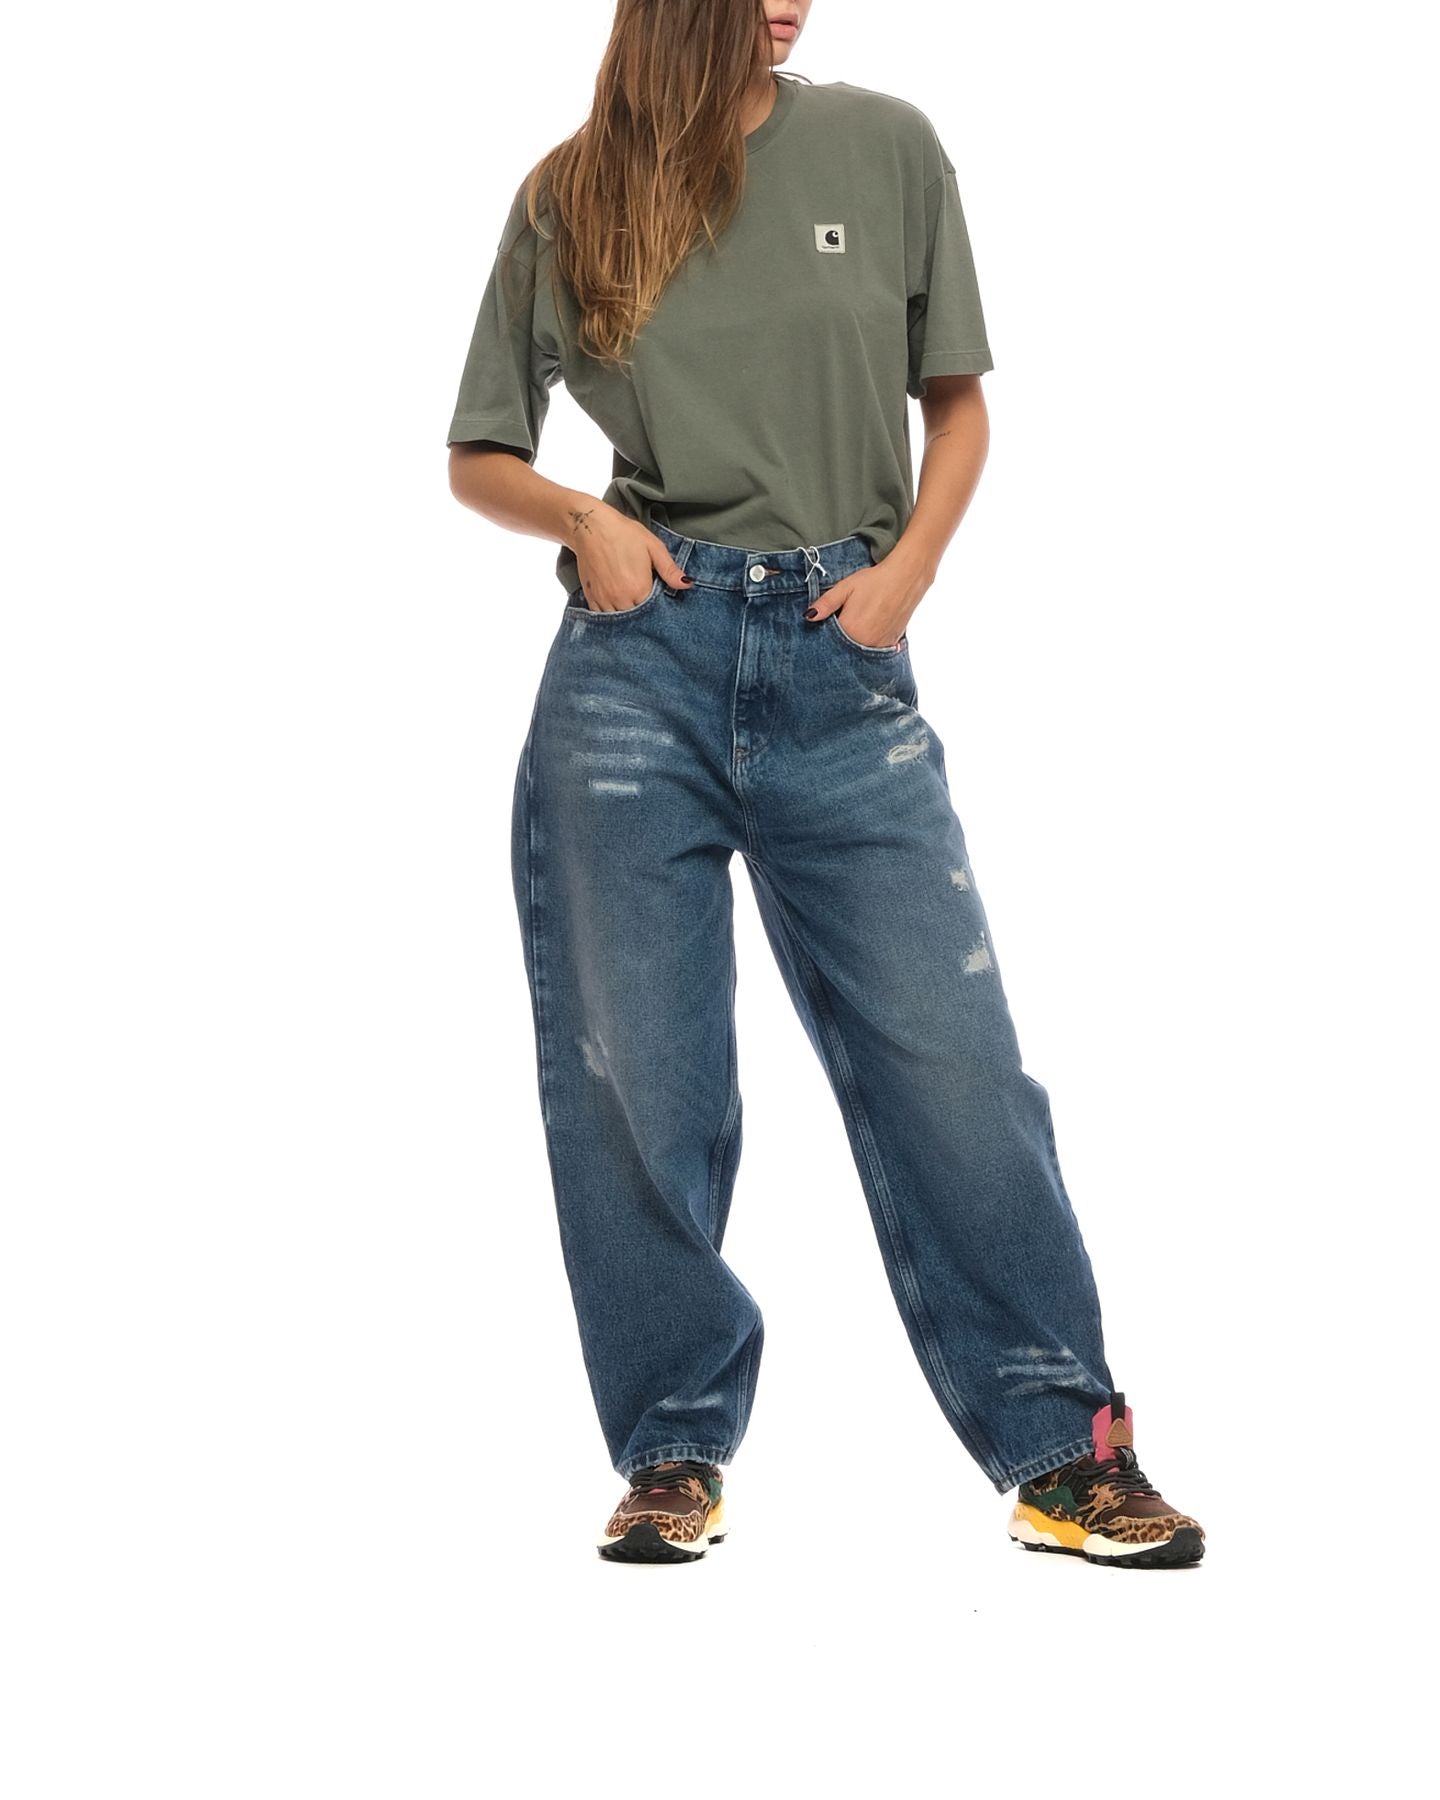 Jeans for woman AMD047D4352388 999 DENIM Amish